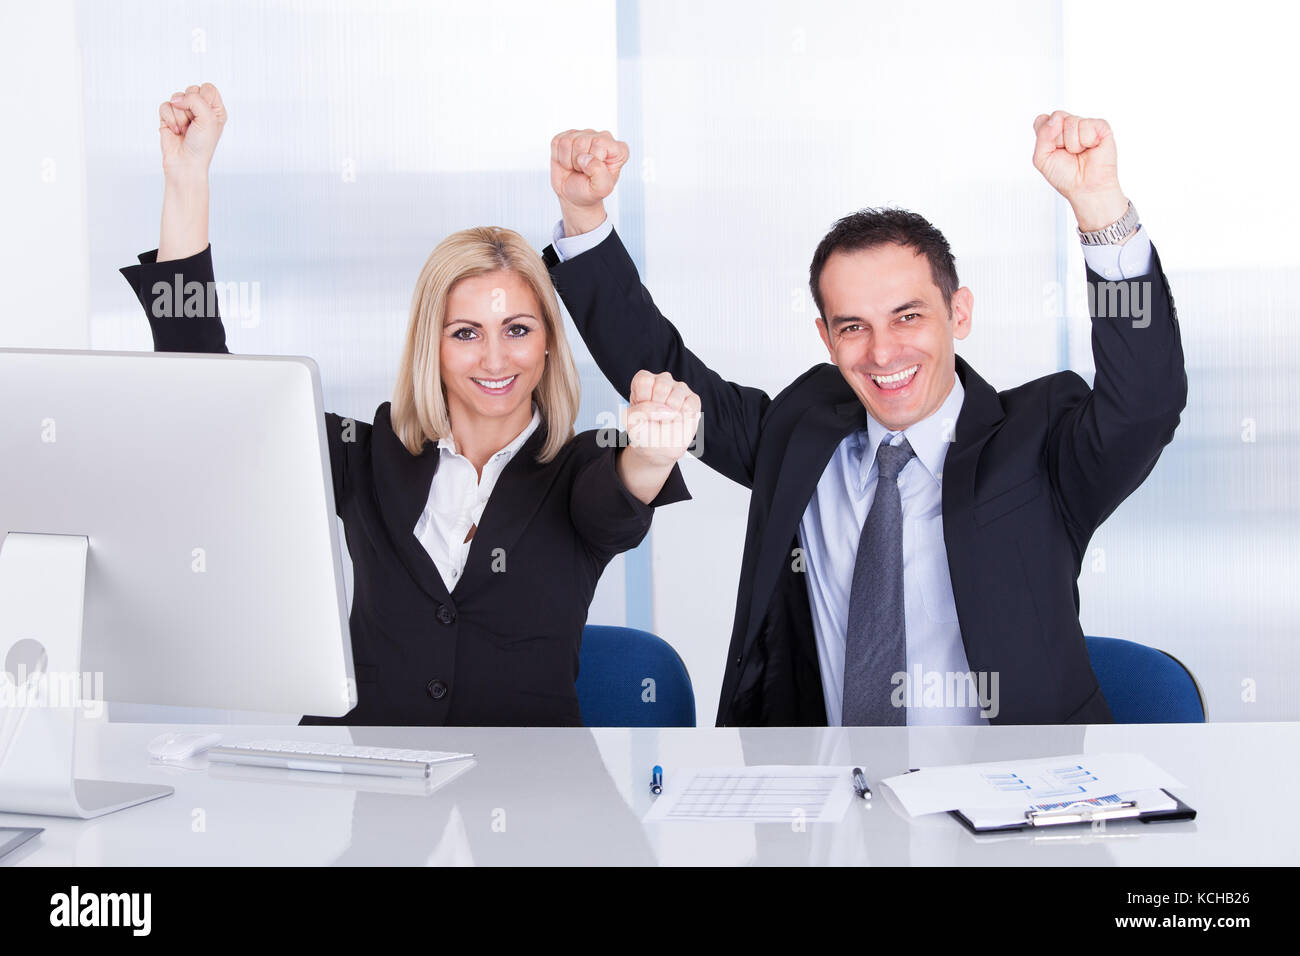 Excited Businessman And Businesswoman Raising Hands At Office Stock Photo